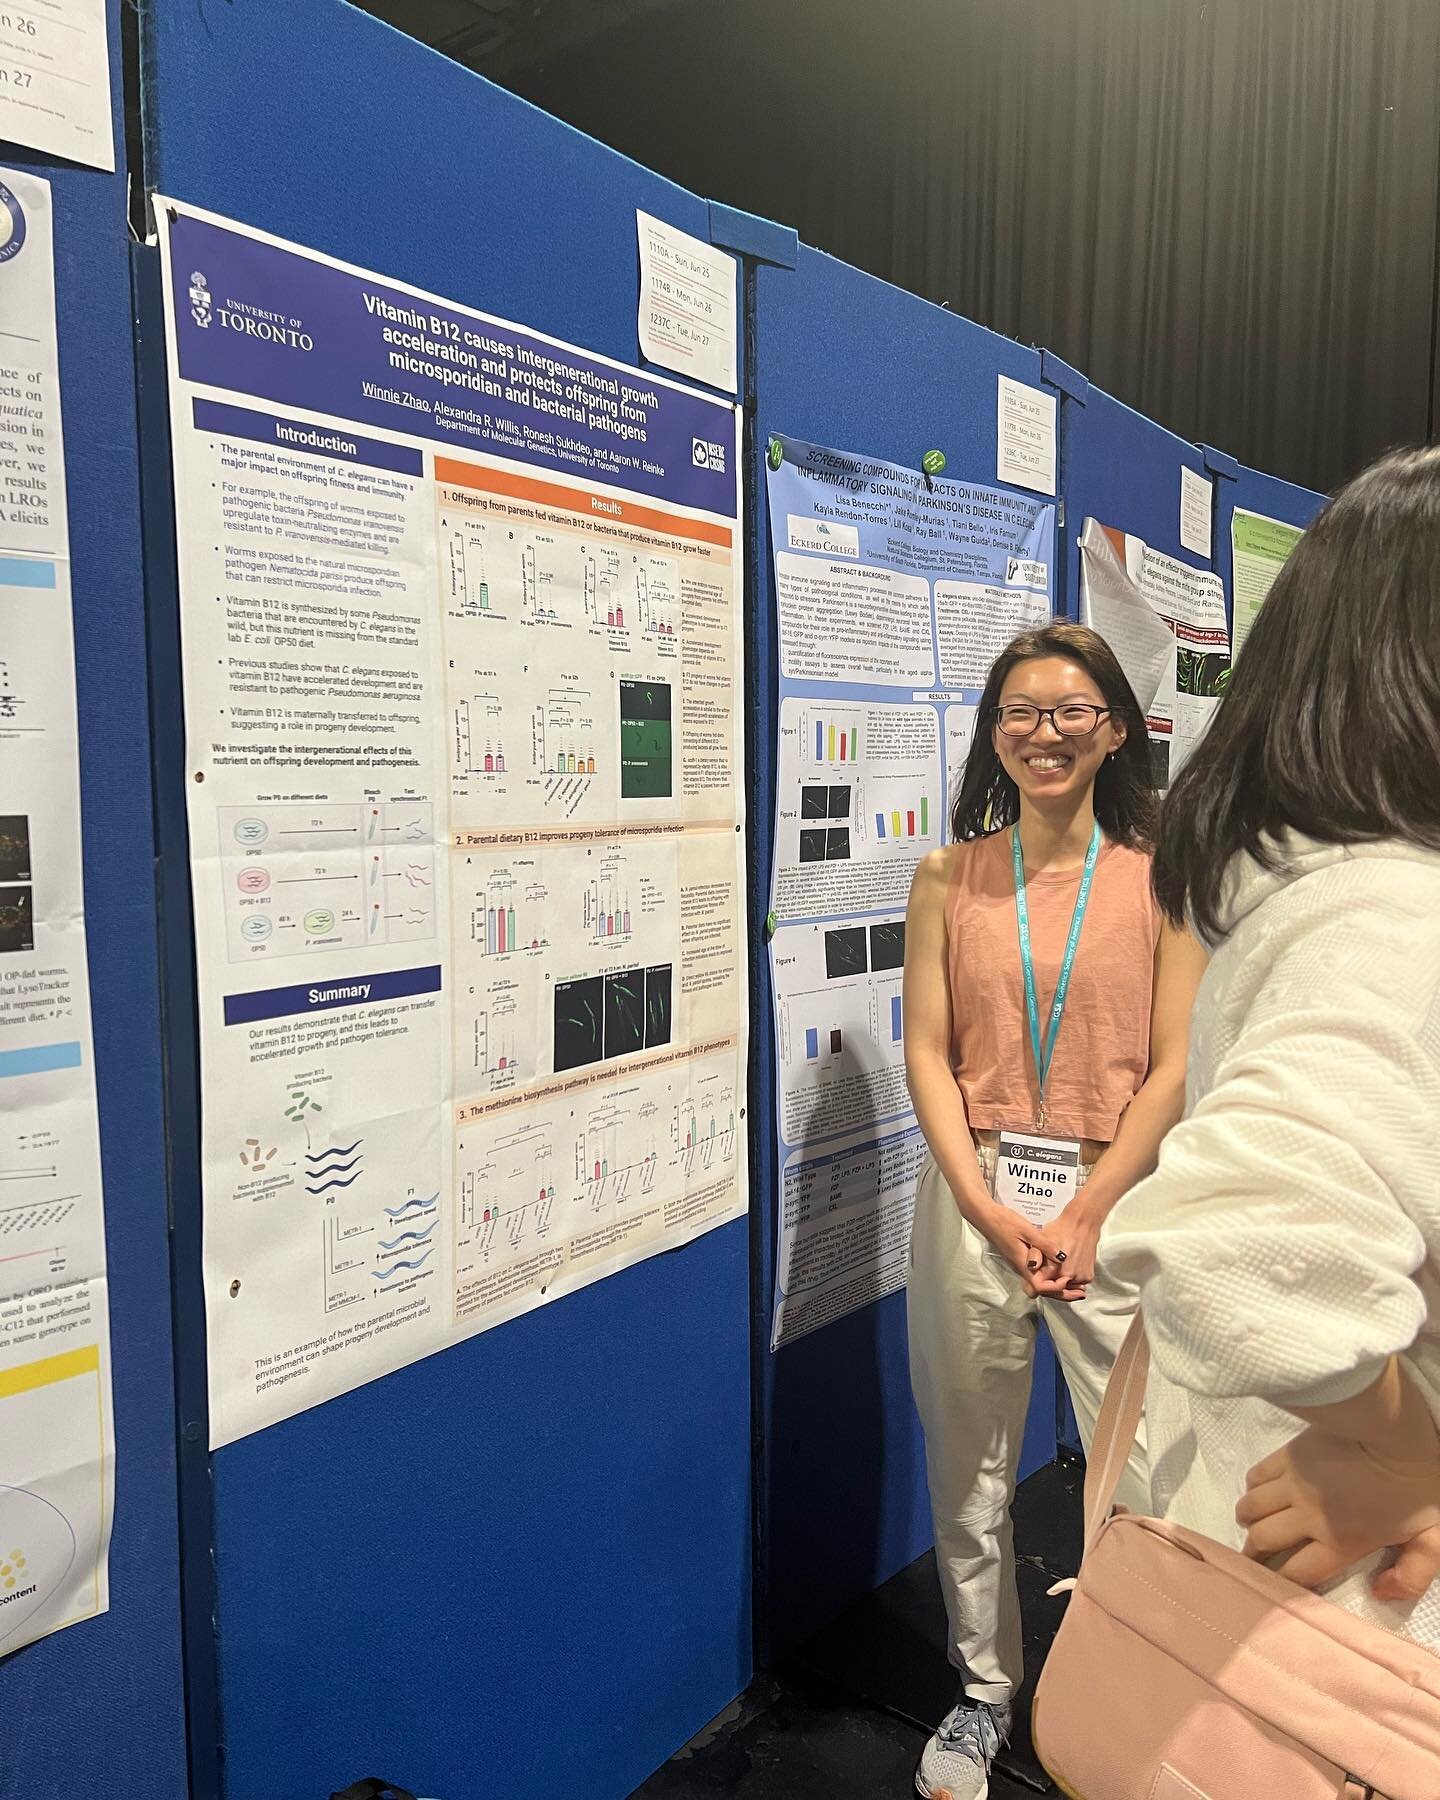 In June, Angcy, Ed, Hala, Winnie and Yin went to the 24th international C.elegans conference in Glasgow, Scotland!  They had Greggs, learned a lot more about C. elegans and presented their own work too! 🏴󠁧󠁢󠁳󠁣󠁴󠁿 🪱 🔬 🧬